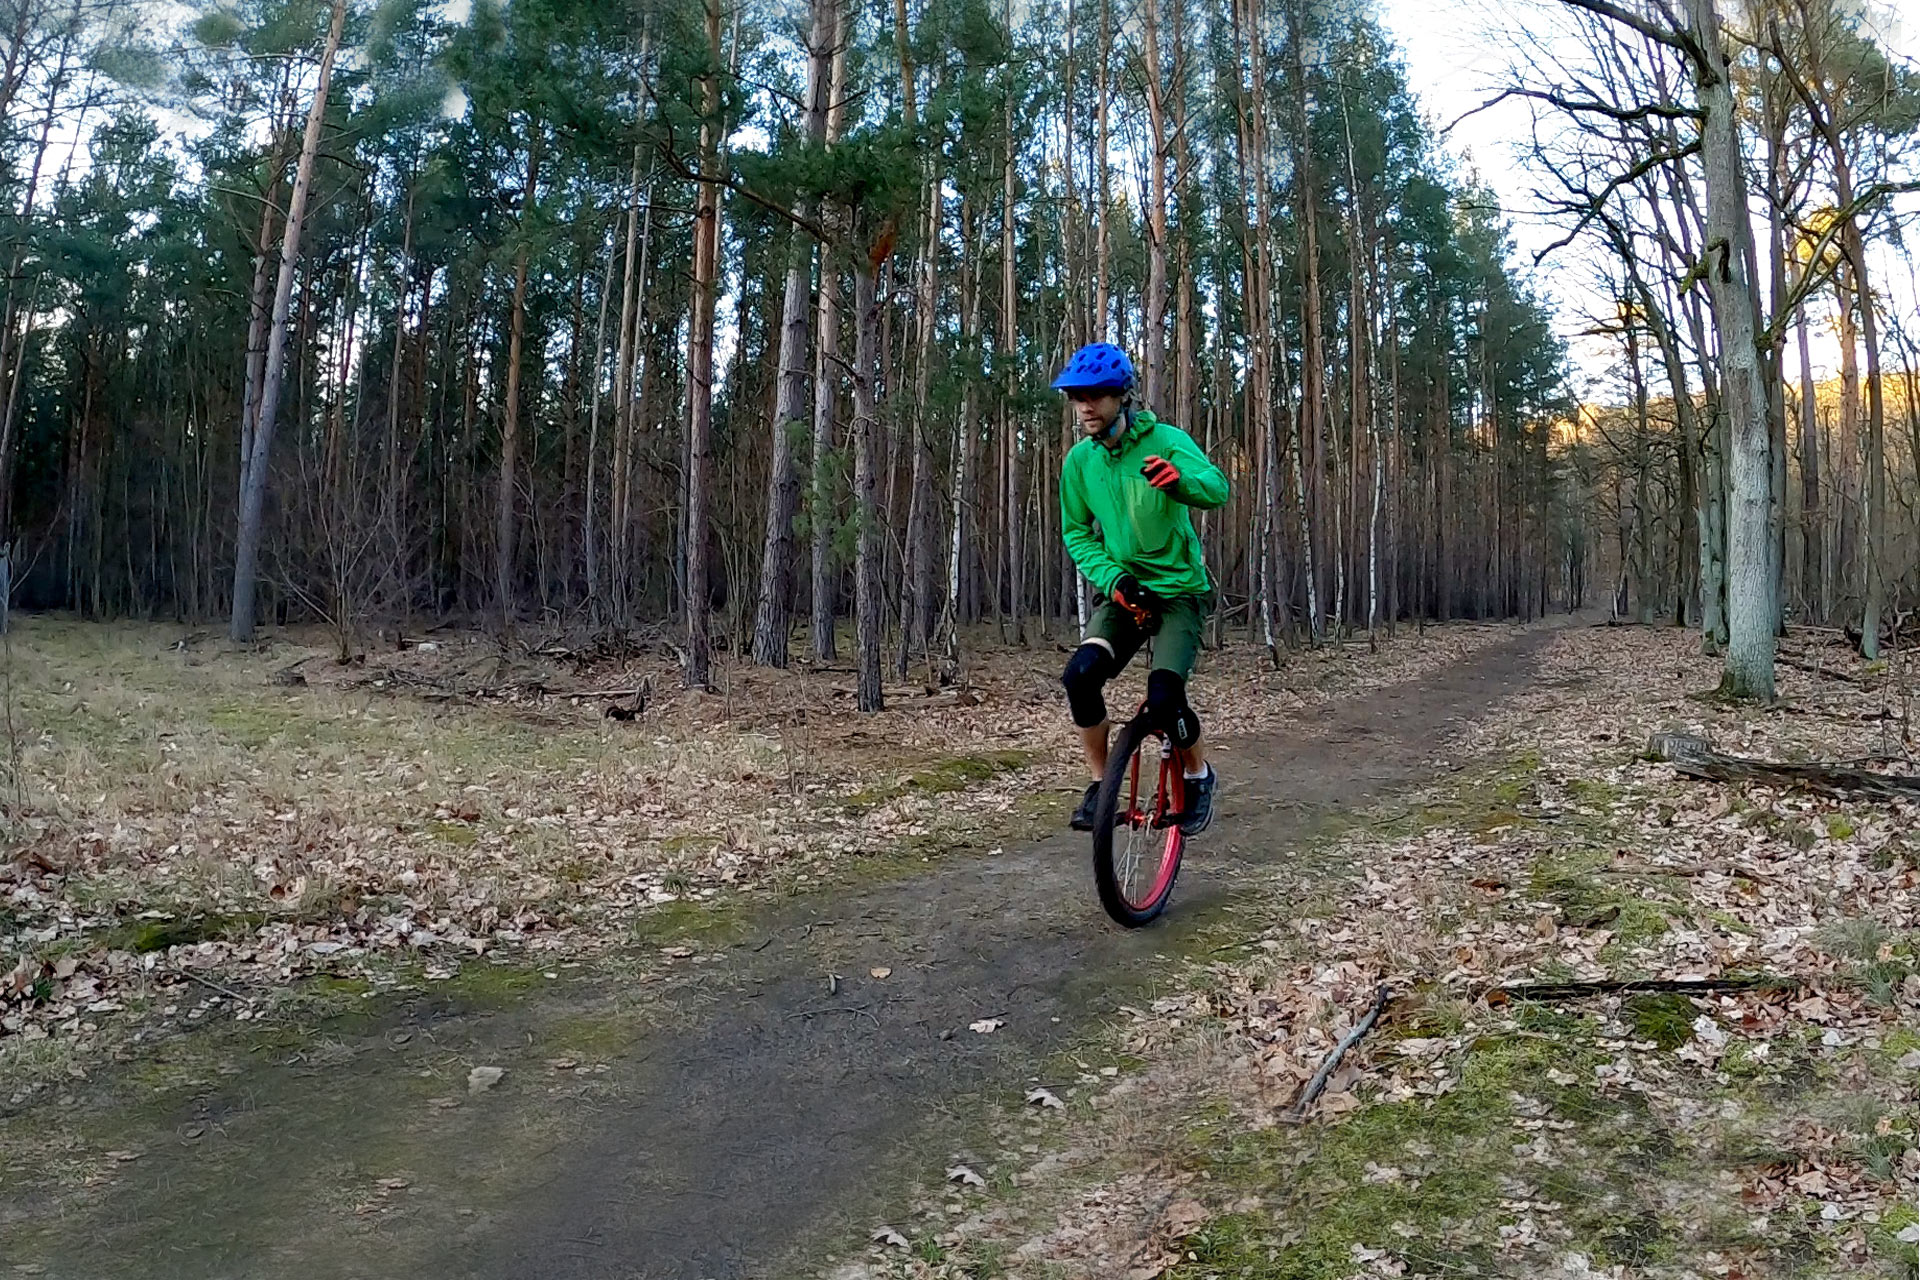 Finn shows us how to Freewheel unicycle in this video